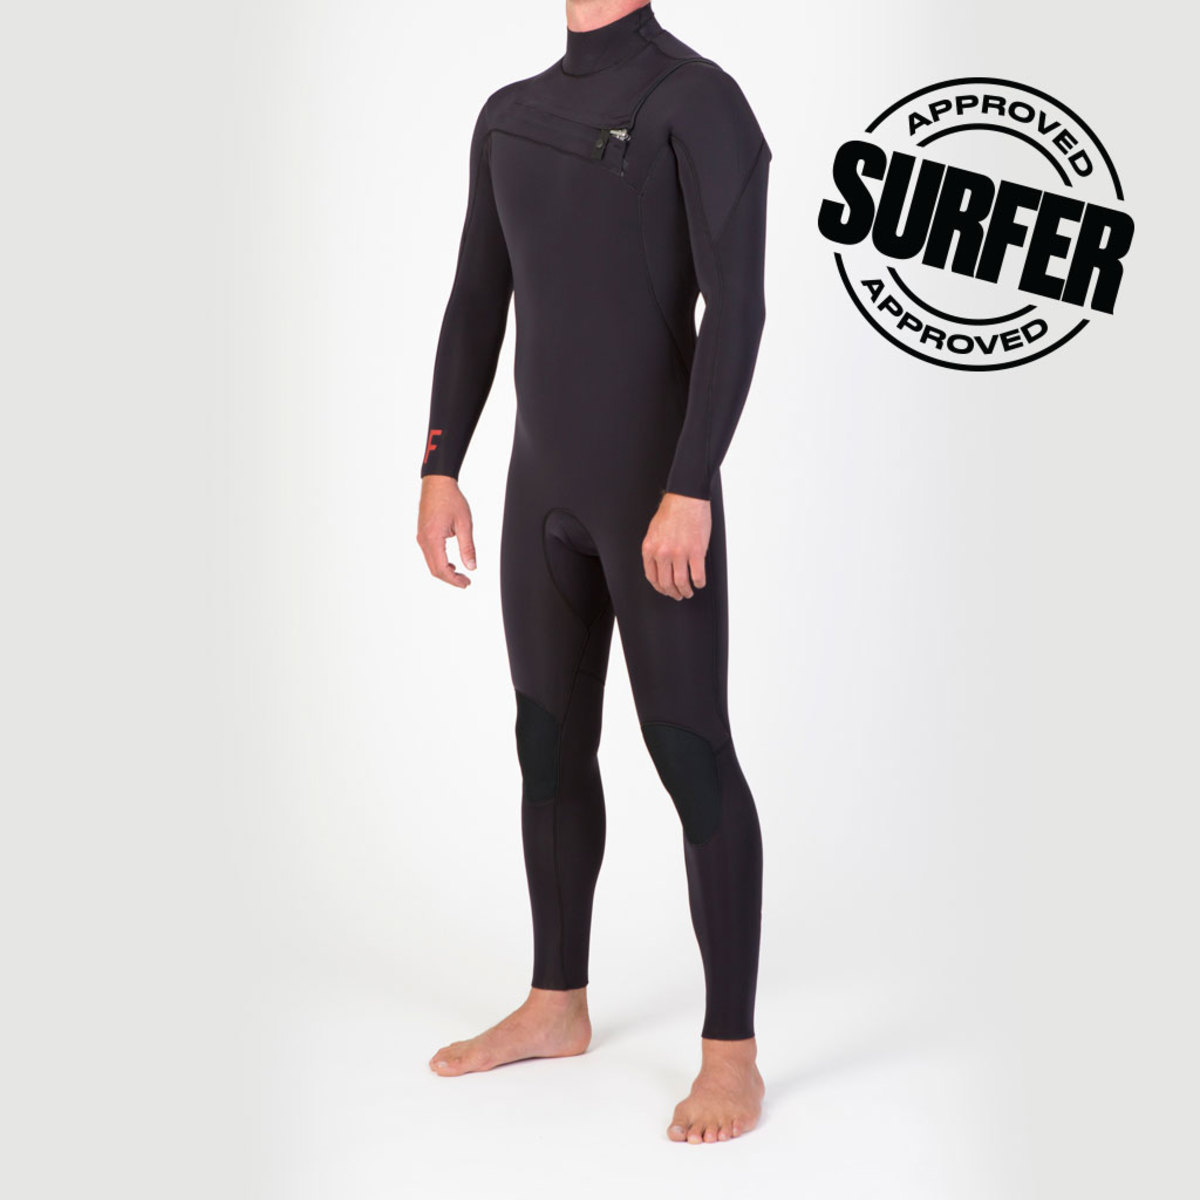 The Yamamoto Neoprene Wetsuit You Can Afford - Surfer